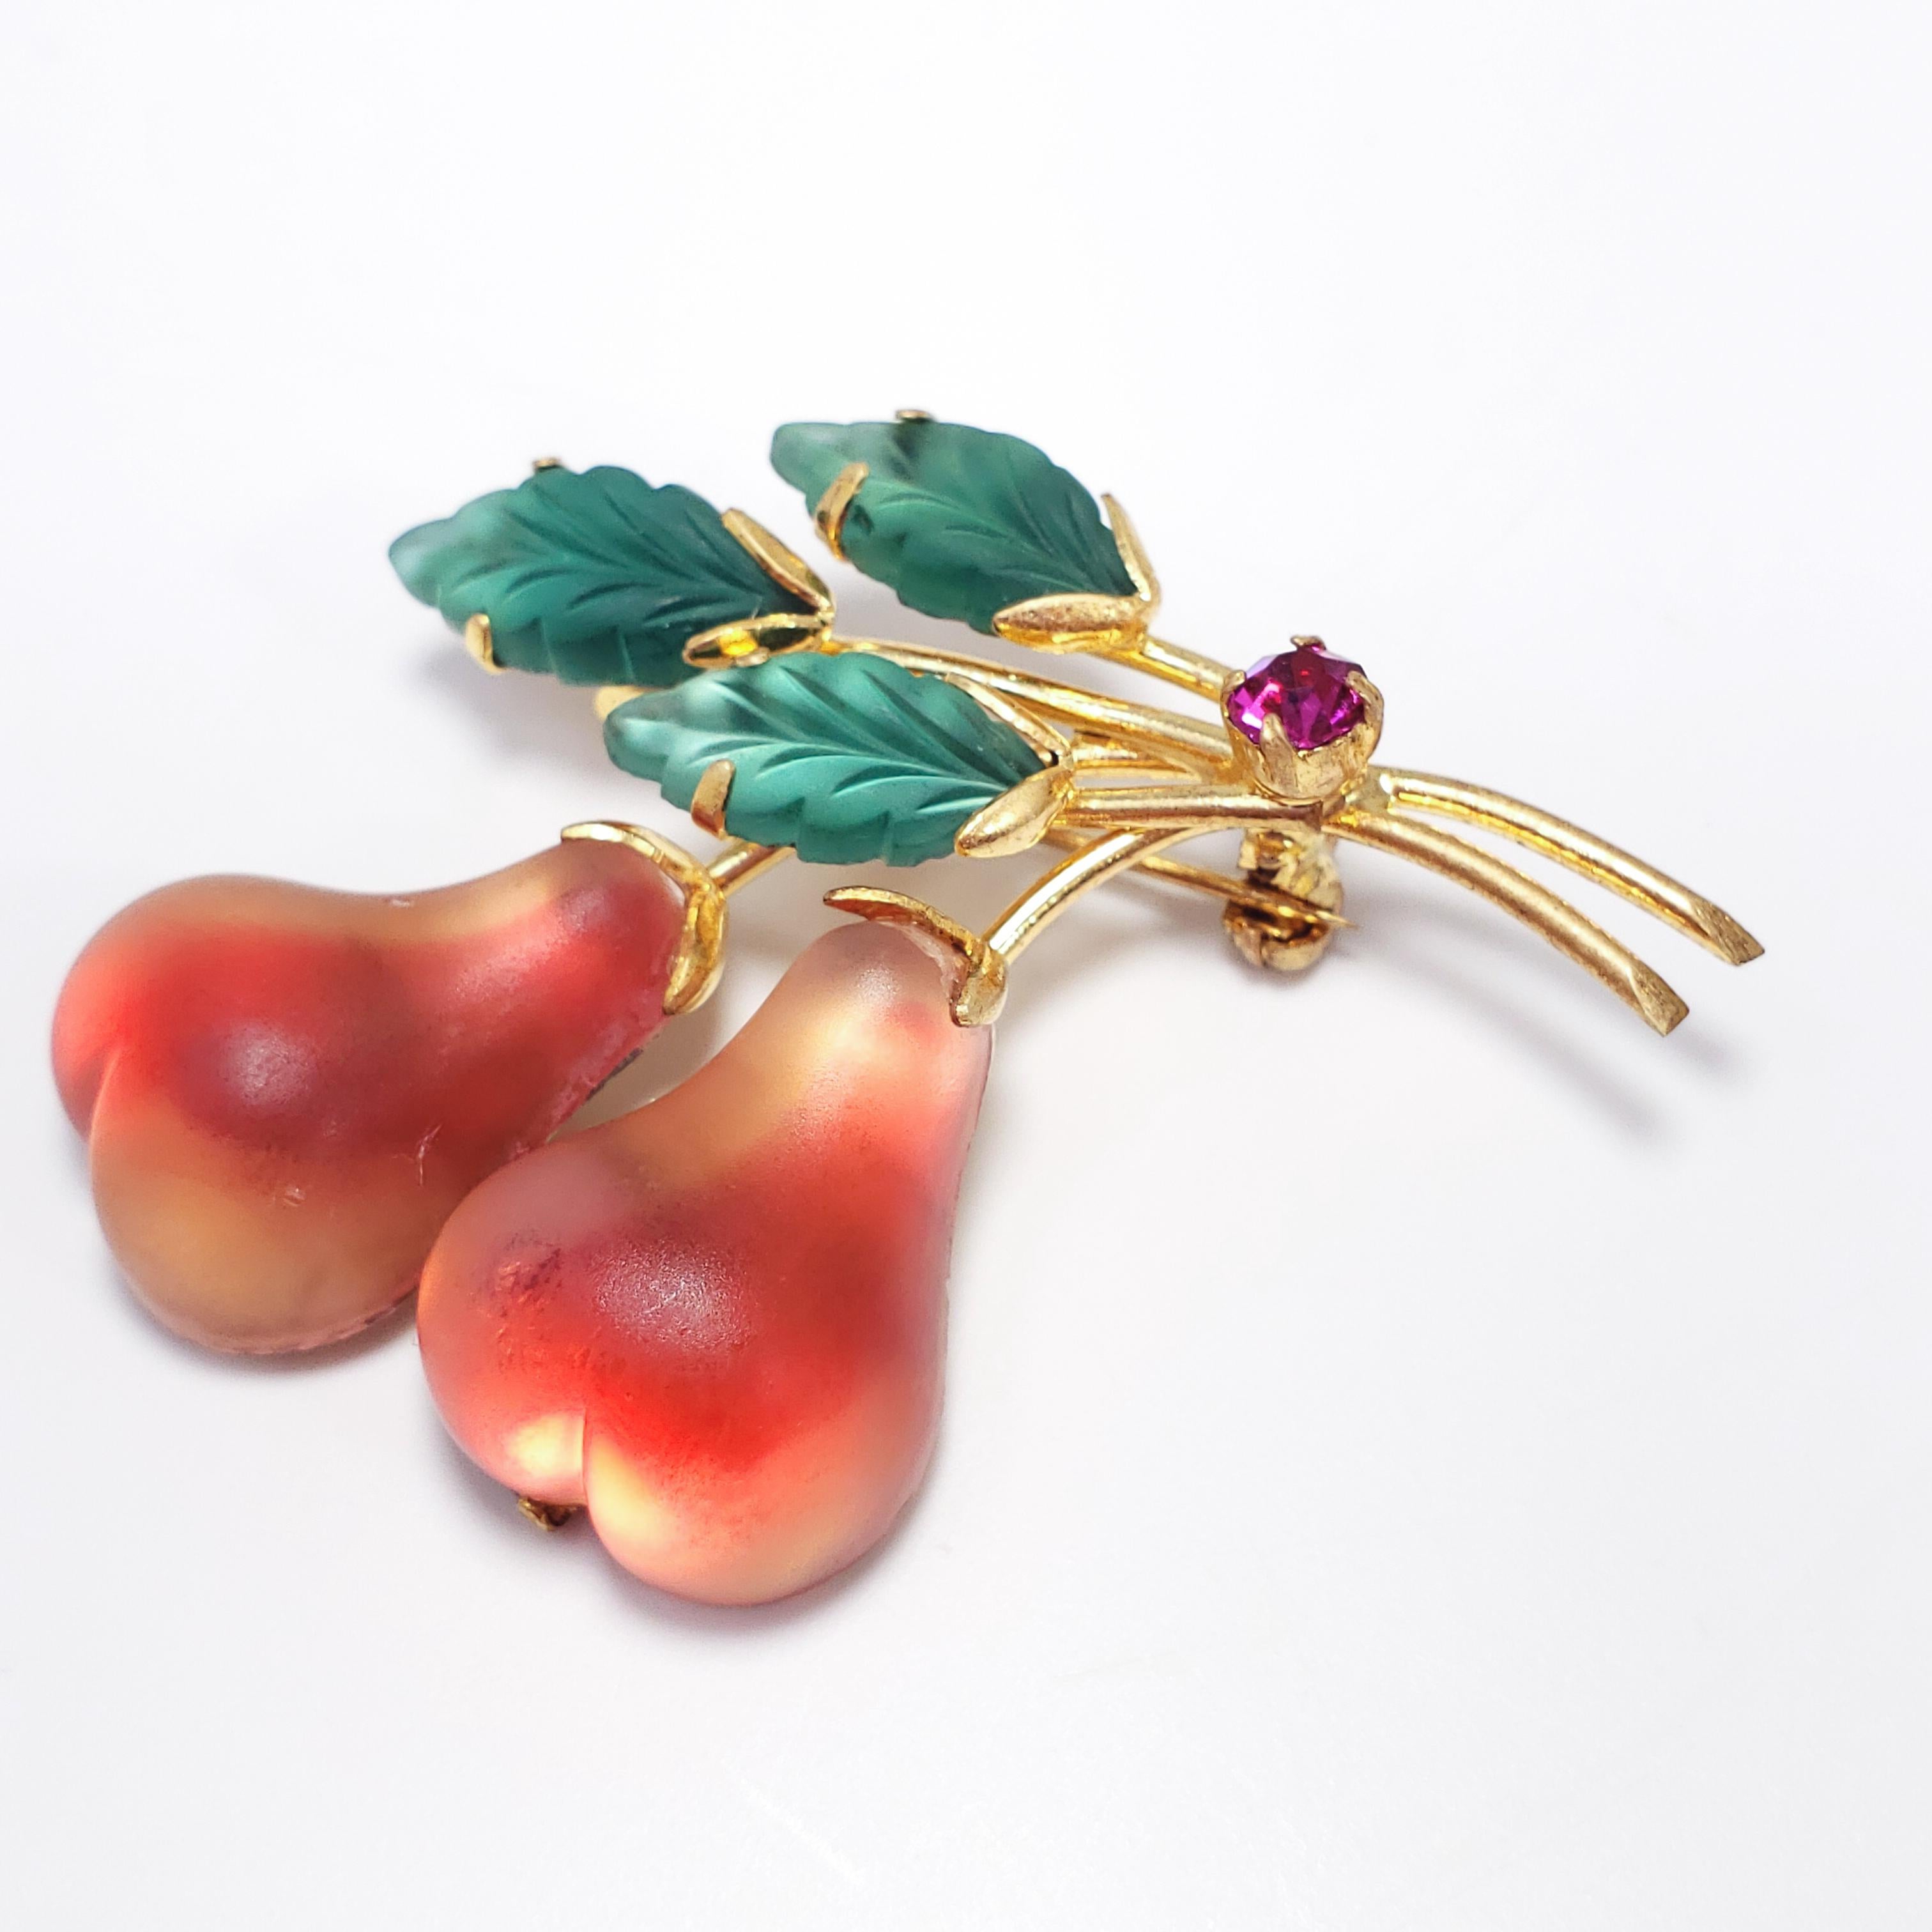 This lovely pin features two multi-color glass pears and three green glass leaves, all prong set and accented with a single violet crystal. Set in gold-tone metal. A vintage accessory perfect for lovers of Austrian jewelry!

Hallmarked